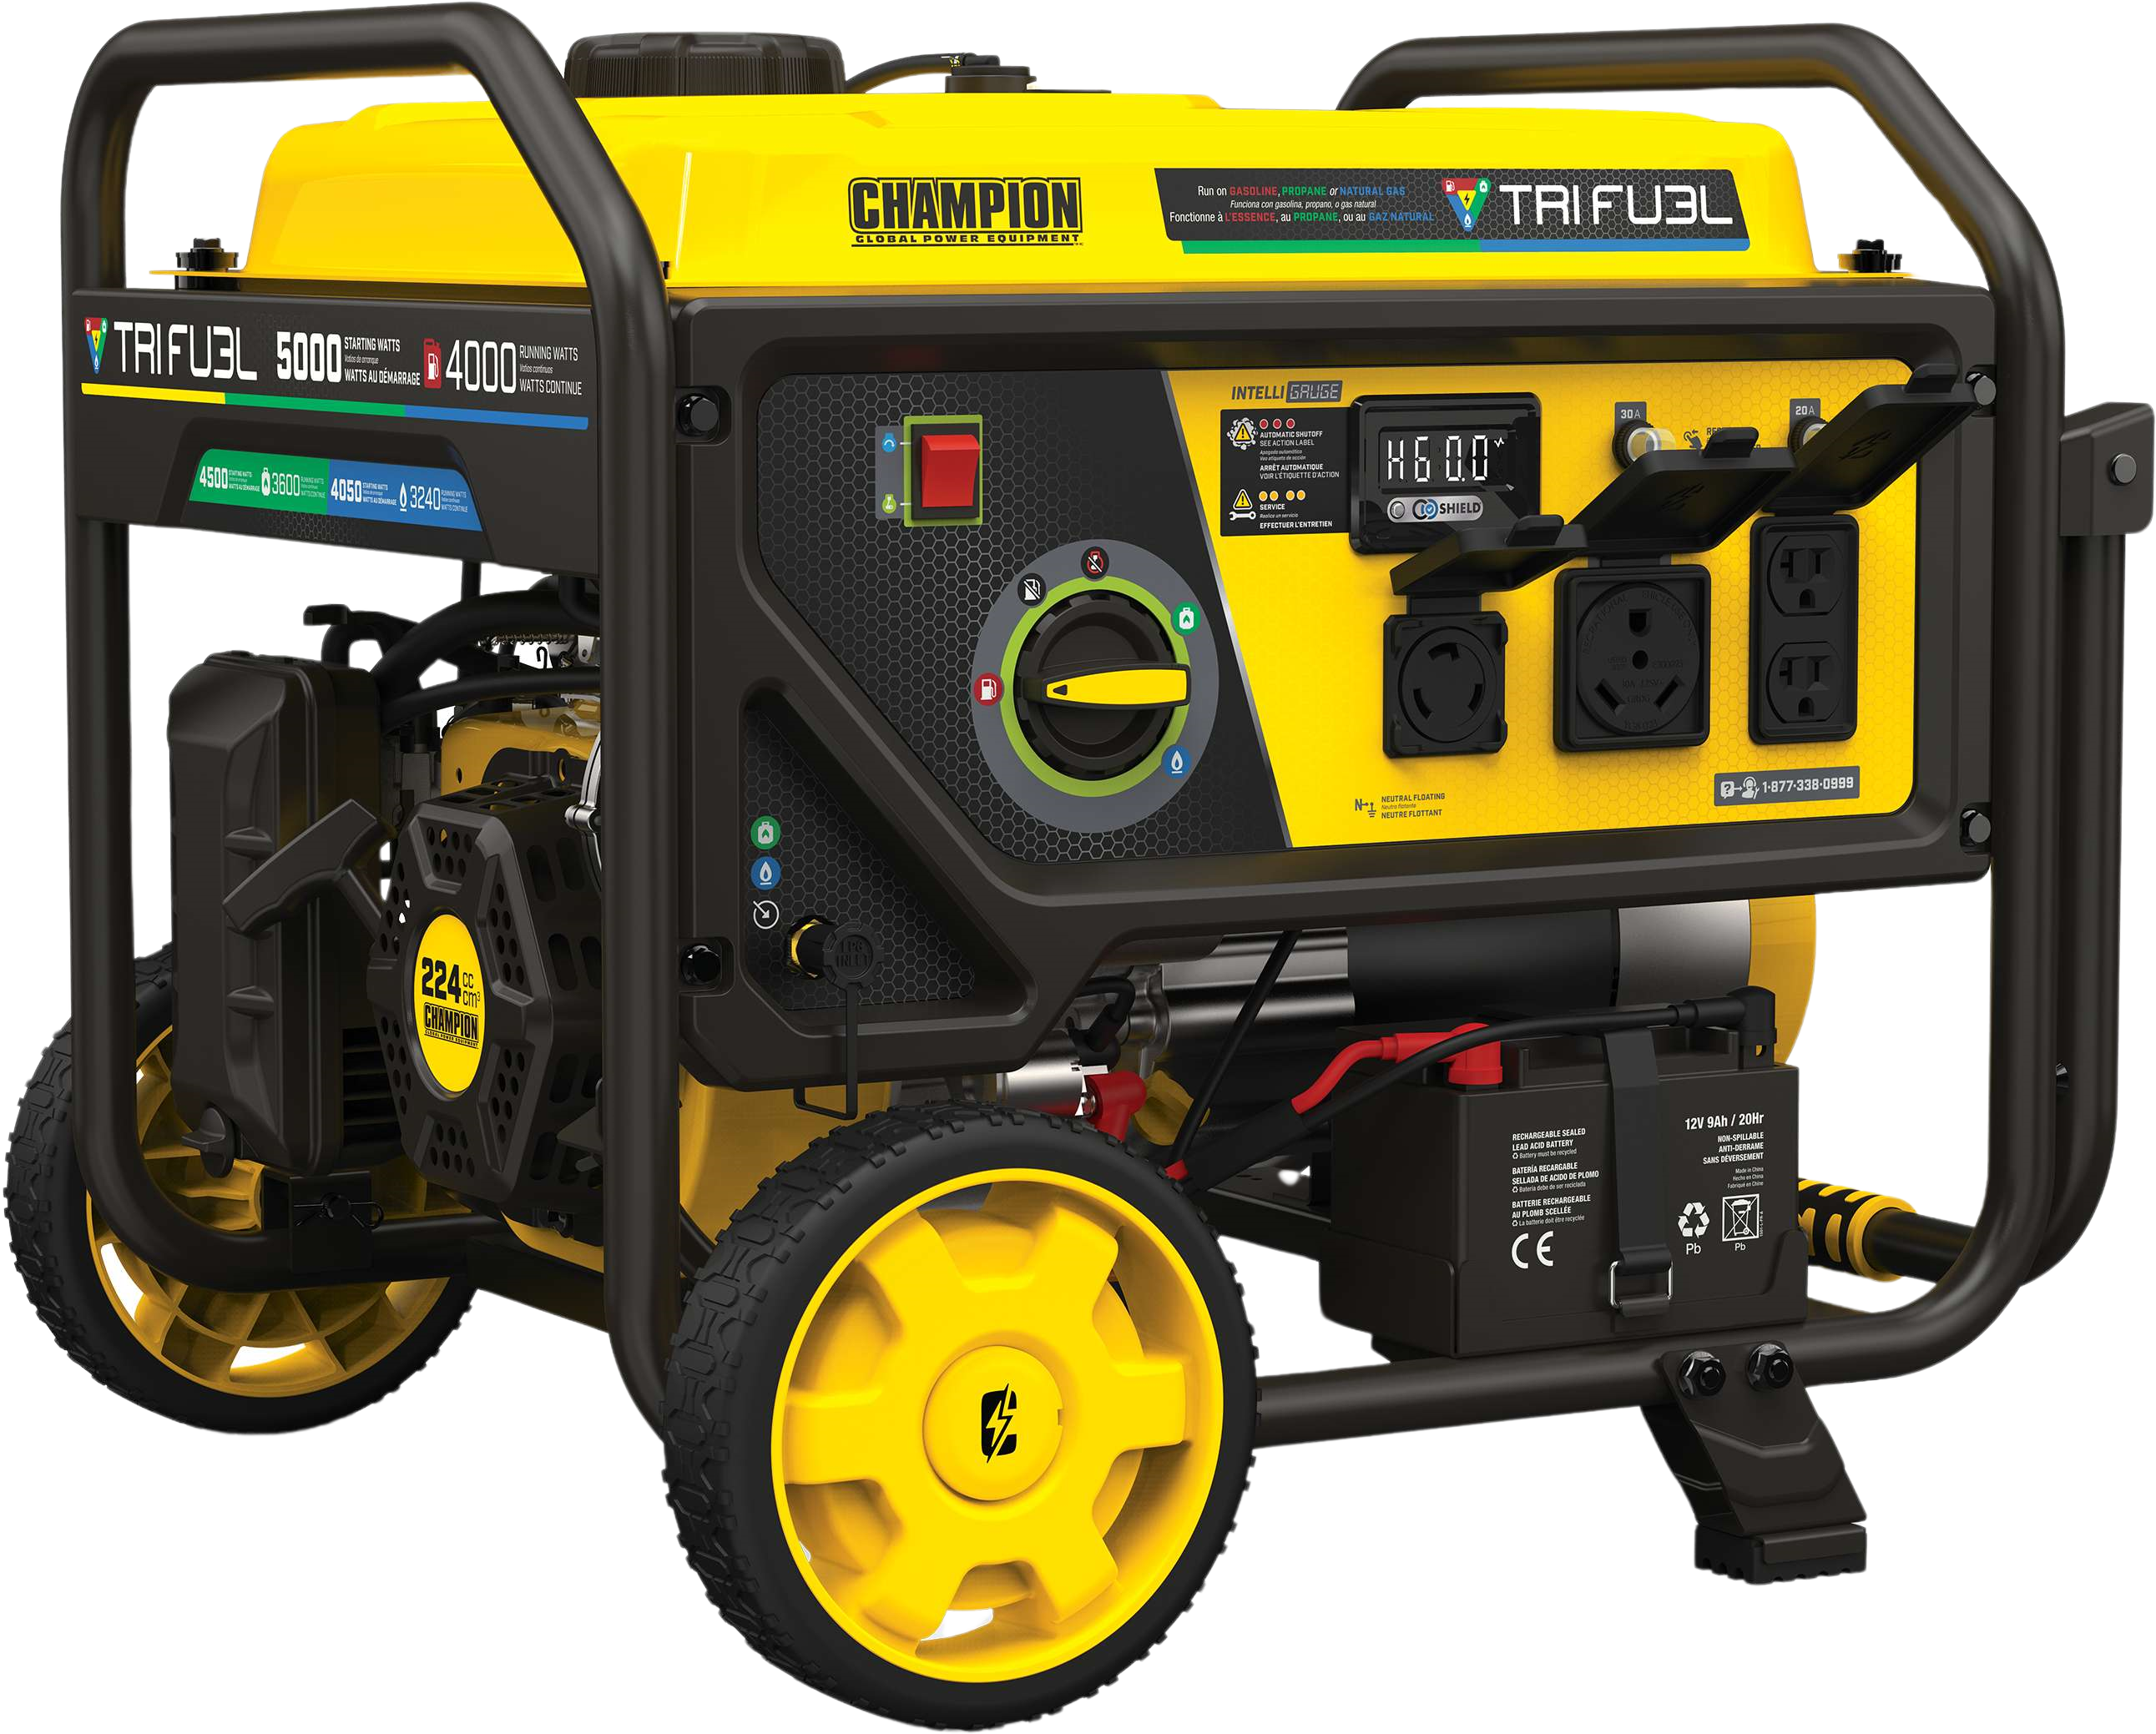 Champion 201223 Tri-Fuel Generator 4000W/5000W Electric Start with CO Shield Gas Propane Natural Gas New